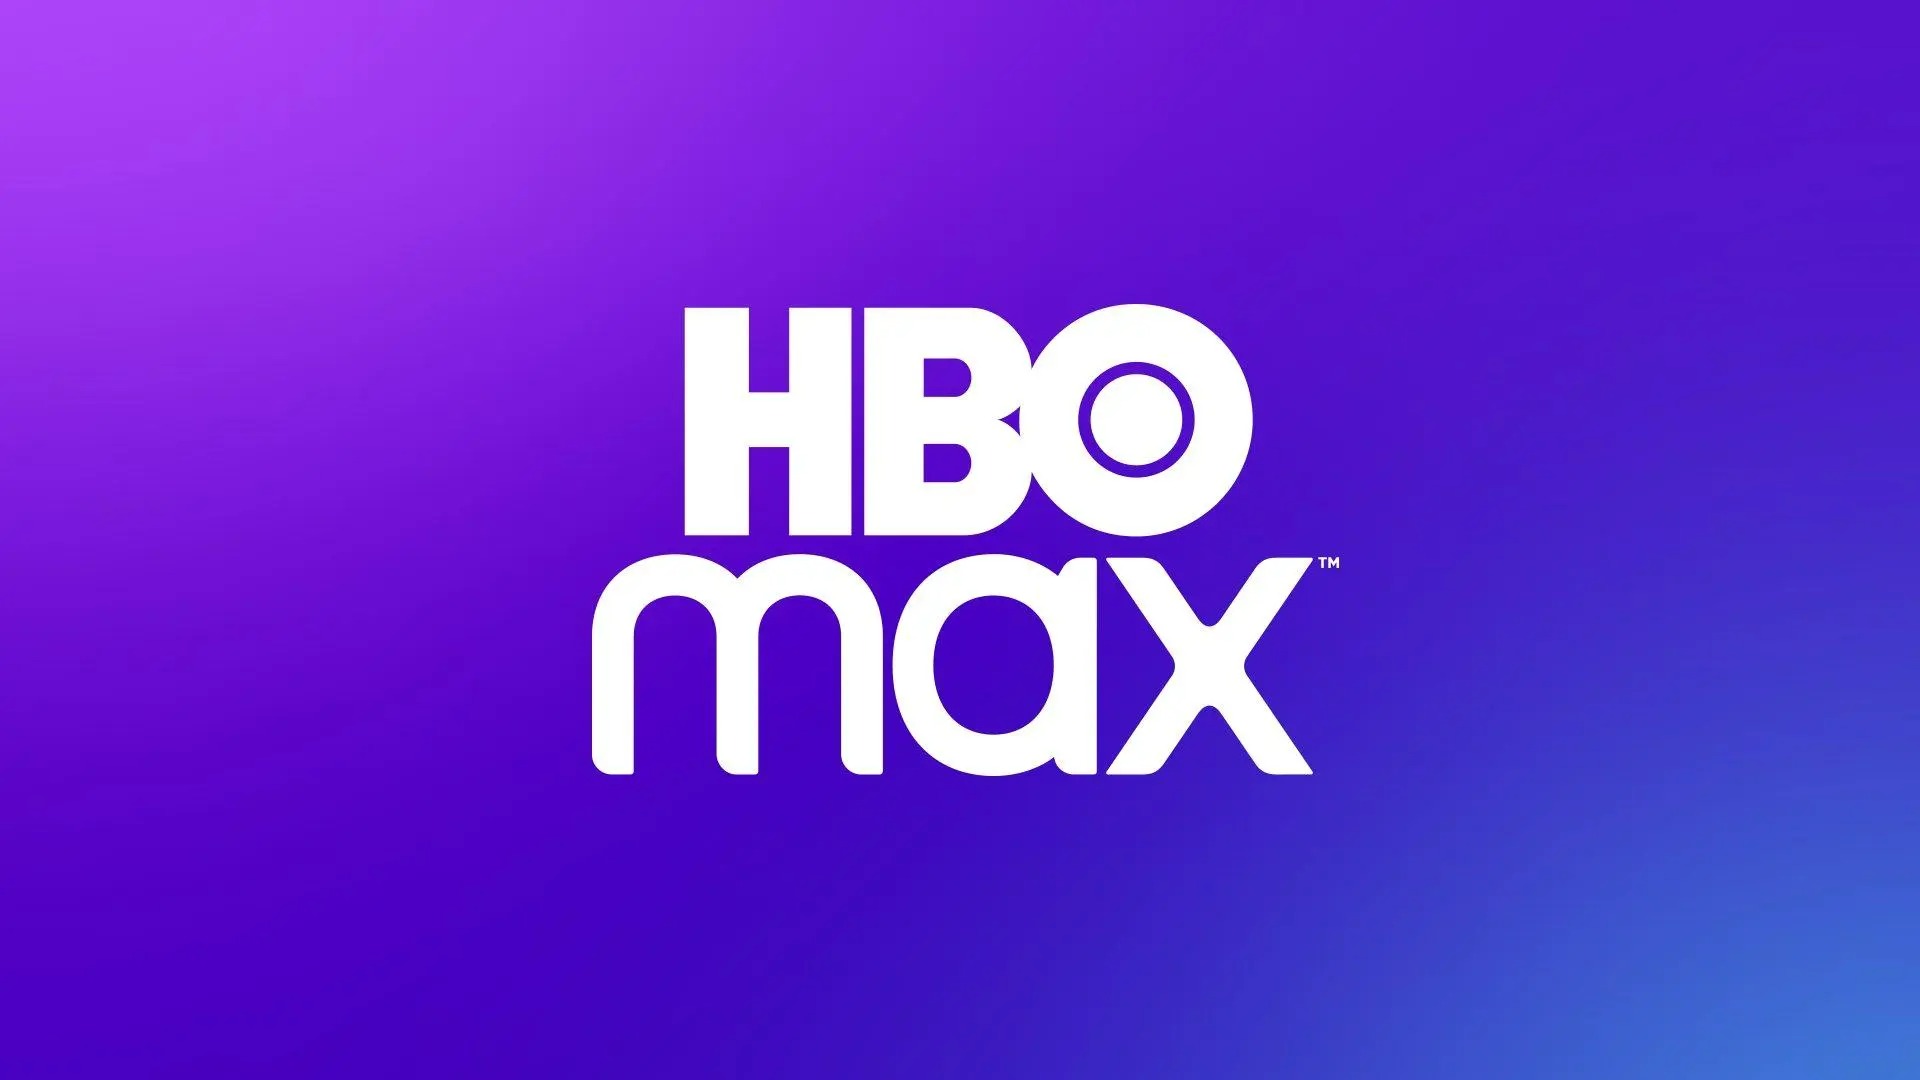 How to fix HBO not working on Chromecast - GoAndroid